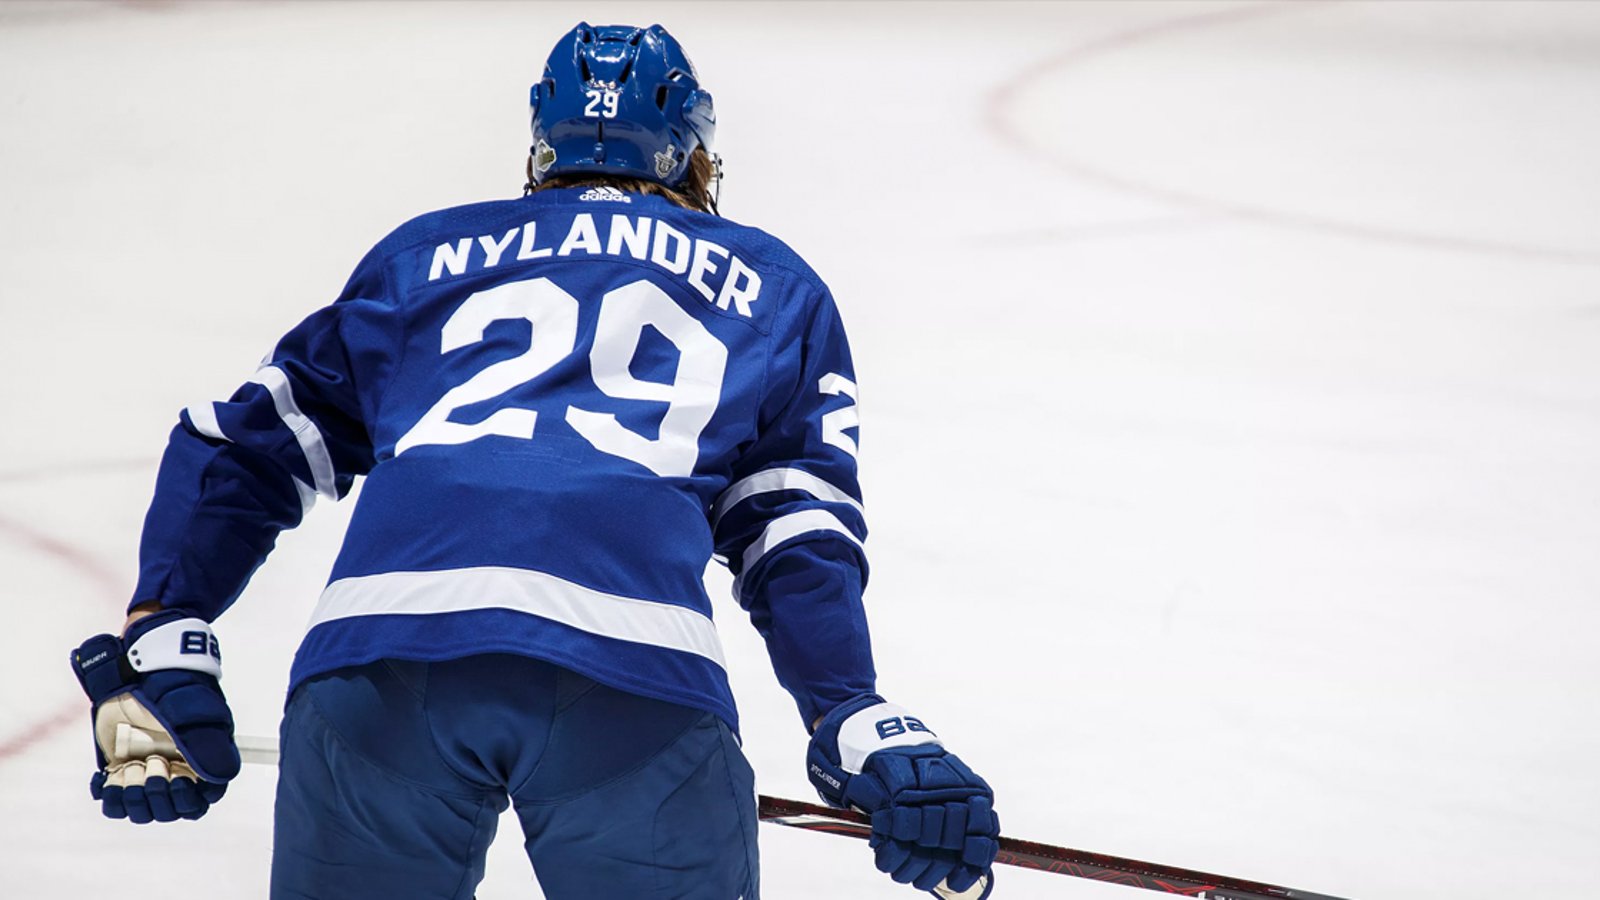 Concerning news for Leafs following meeting between Nylander and Dubas